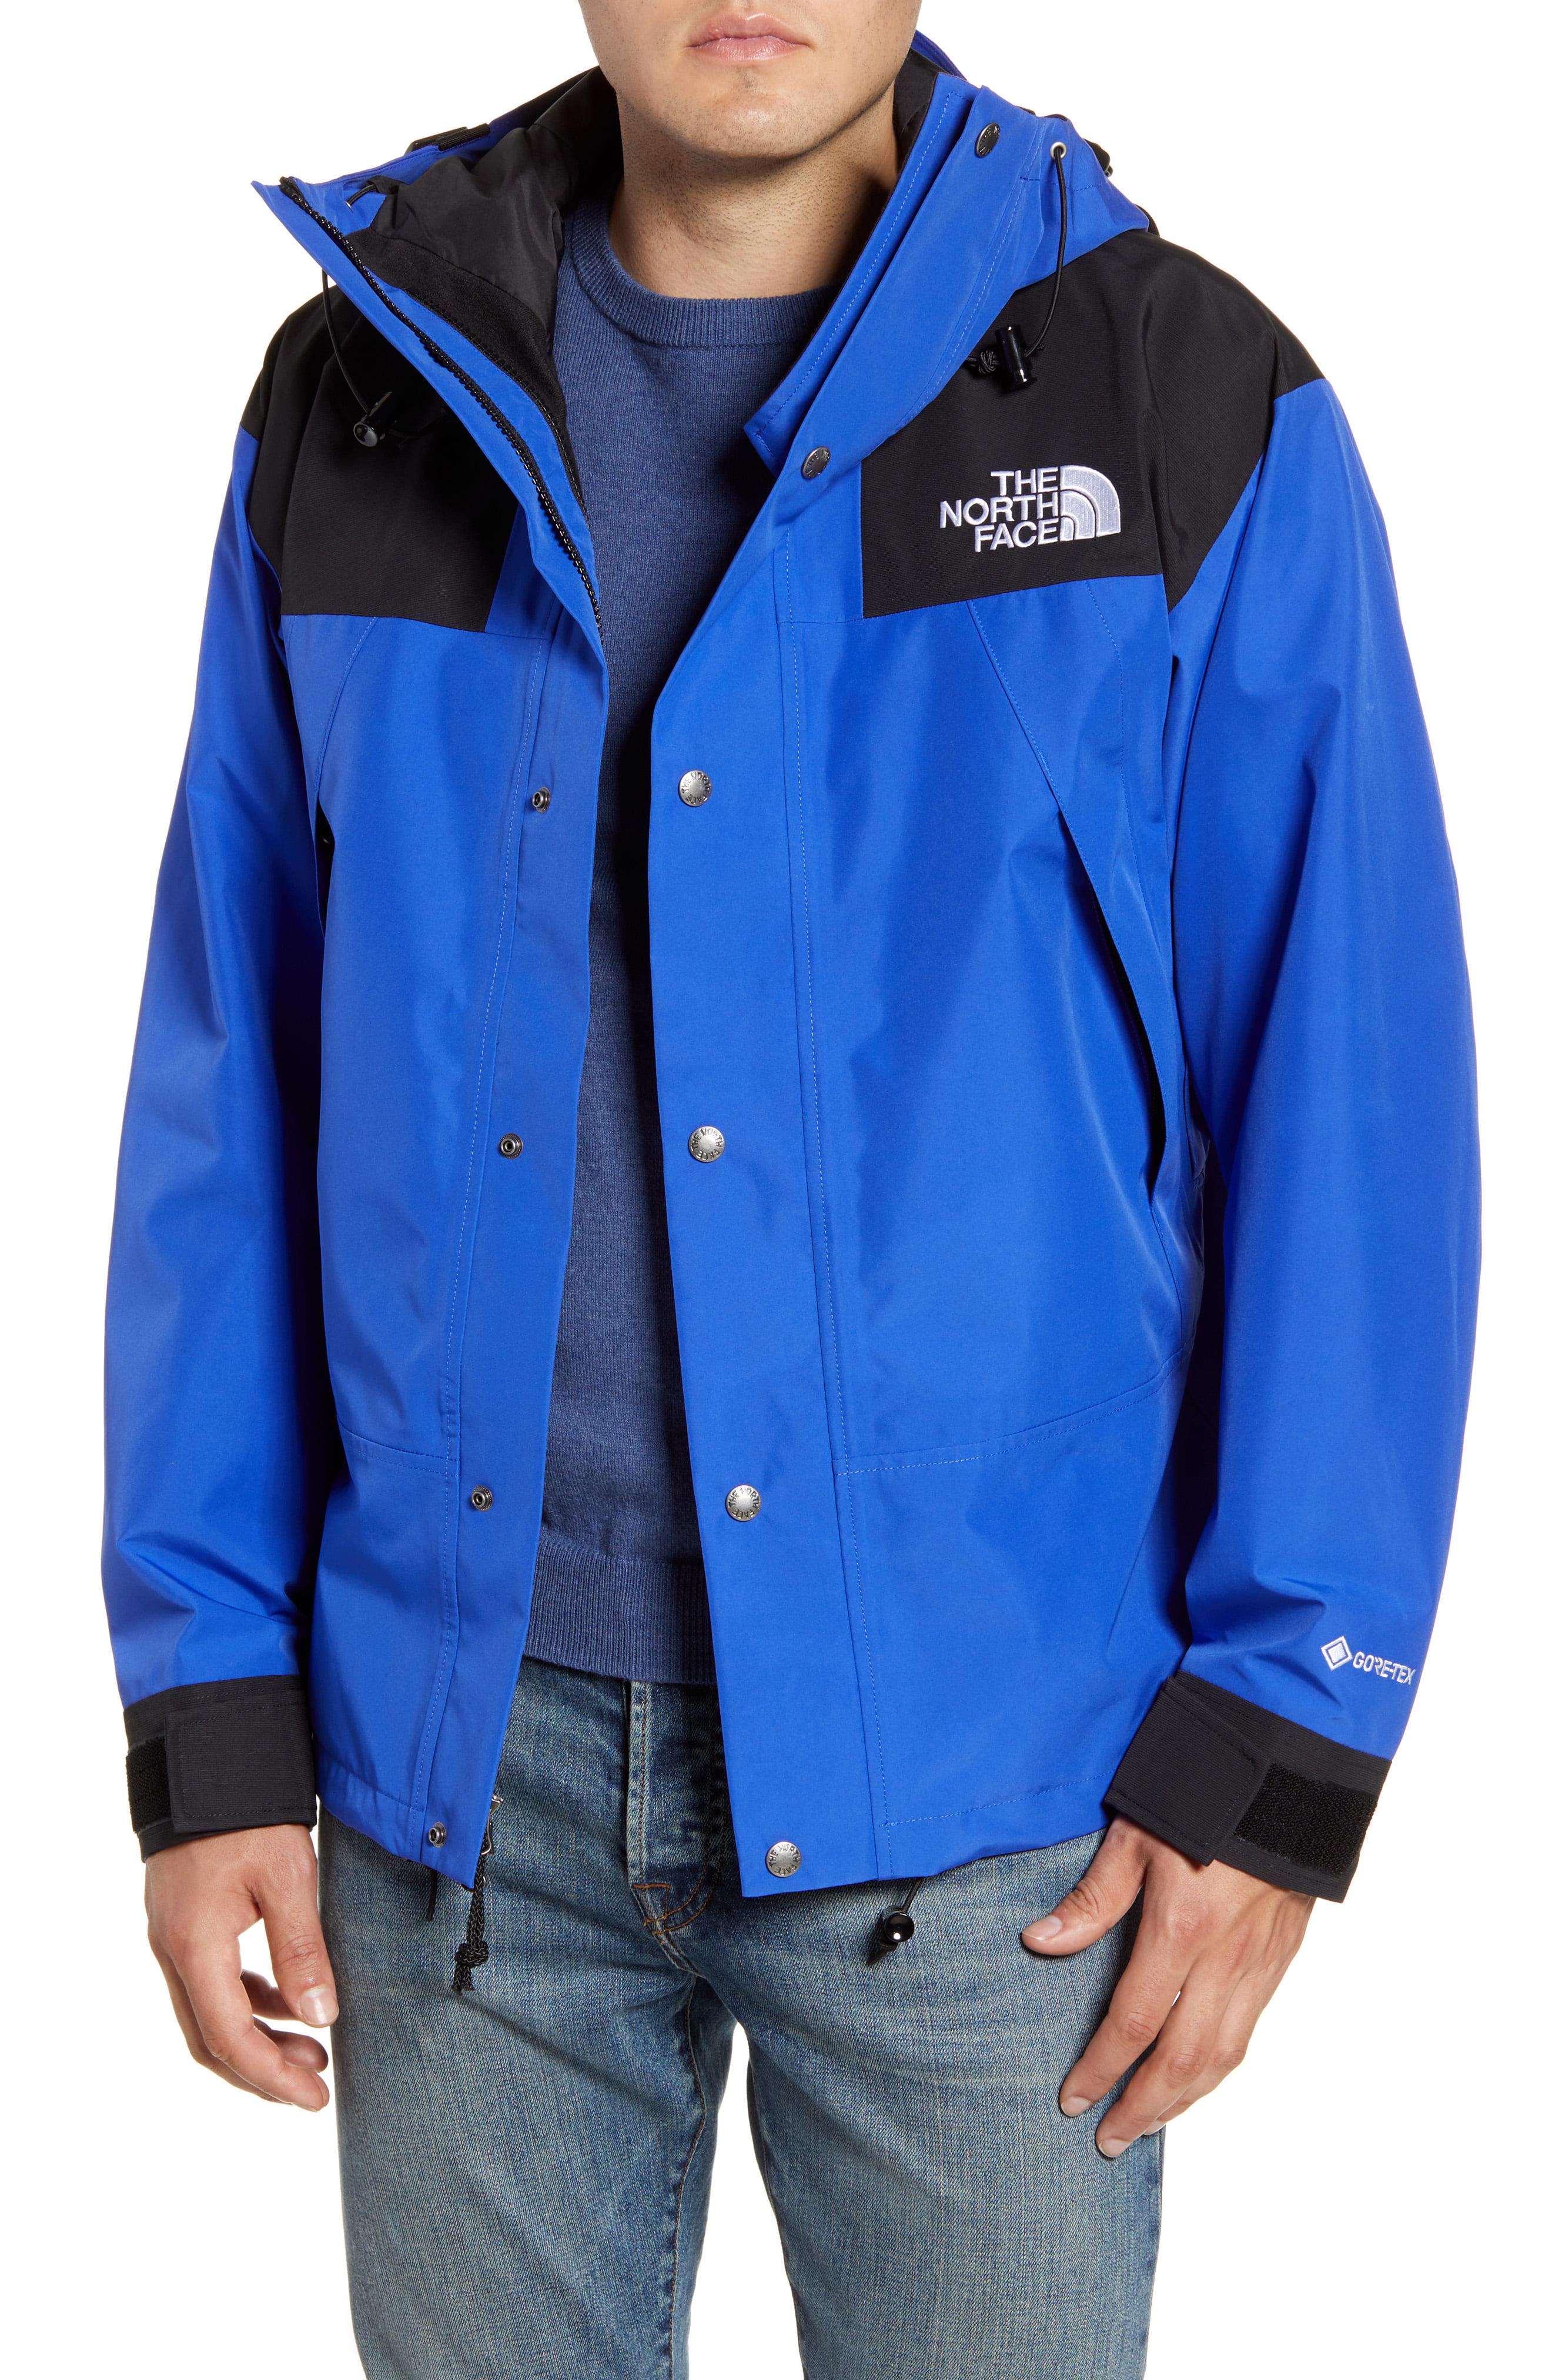 The North Face 1990 Mountain Gore-tex Ii Waterproof Jacket in Blue for